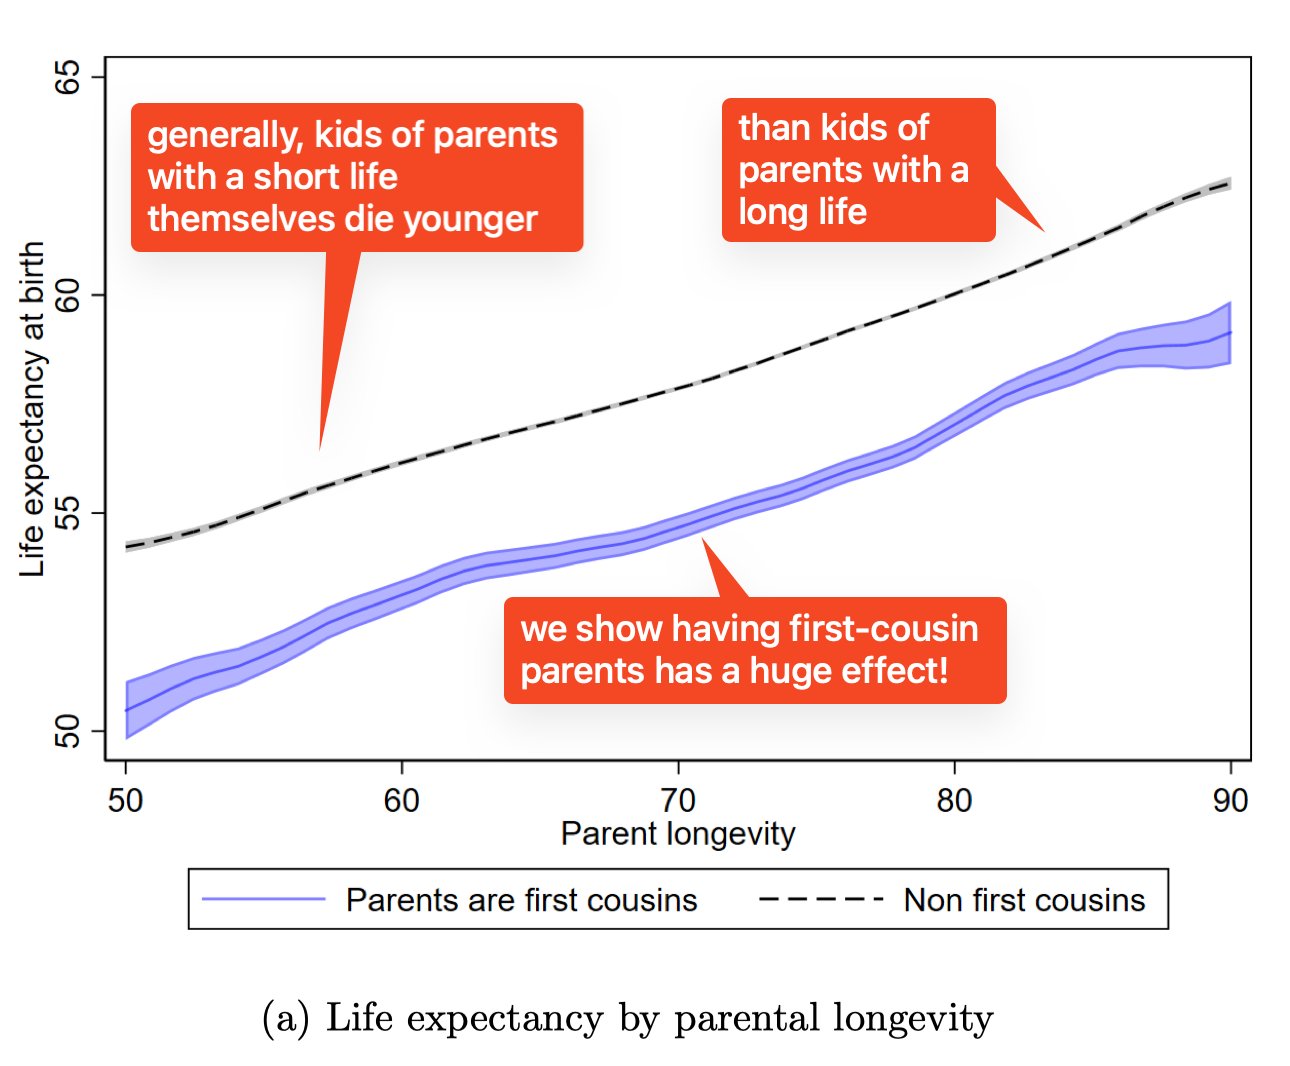 Graph showing life expectancy of children versus parental longevity. Children’s lifespan is correlated with their parents’, and children of cousins live consistently around three years shorter, regardless of parental longevity.